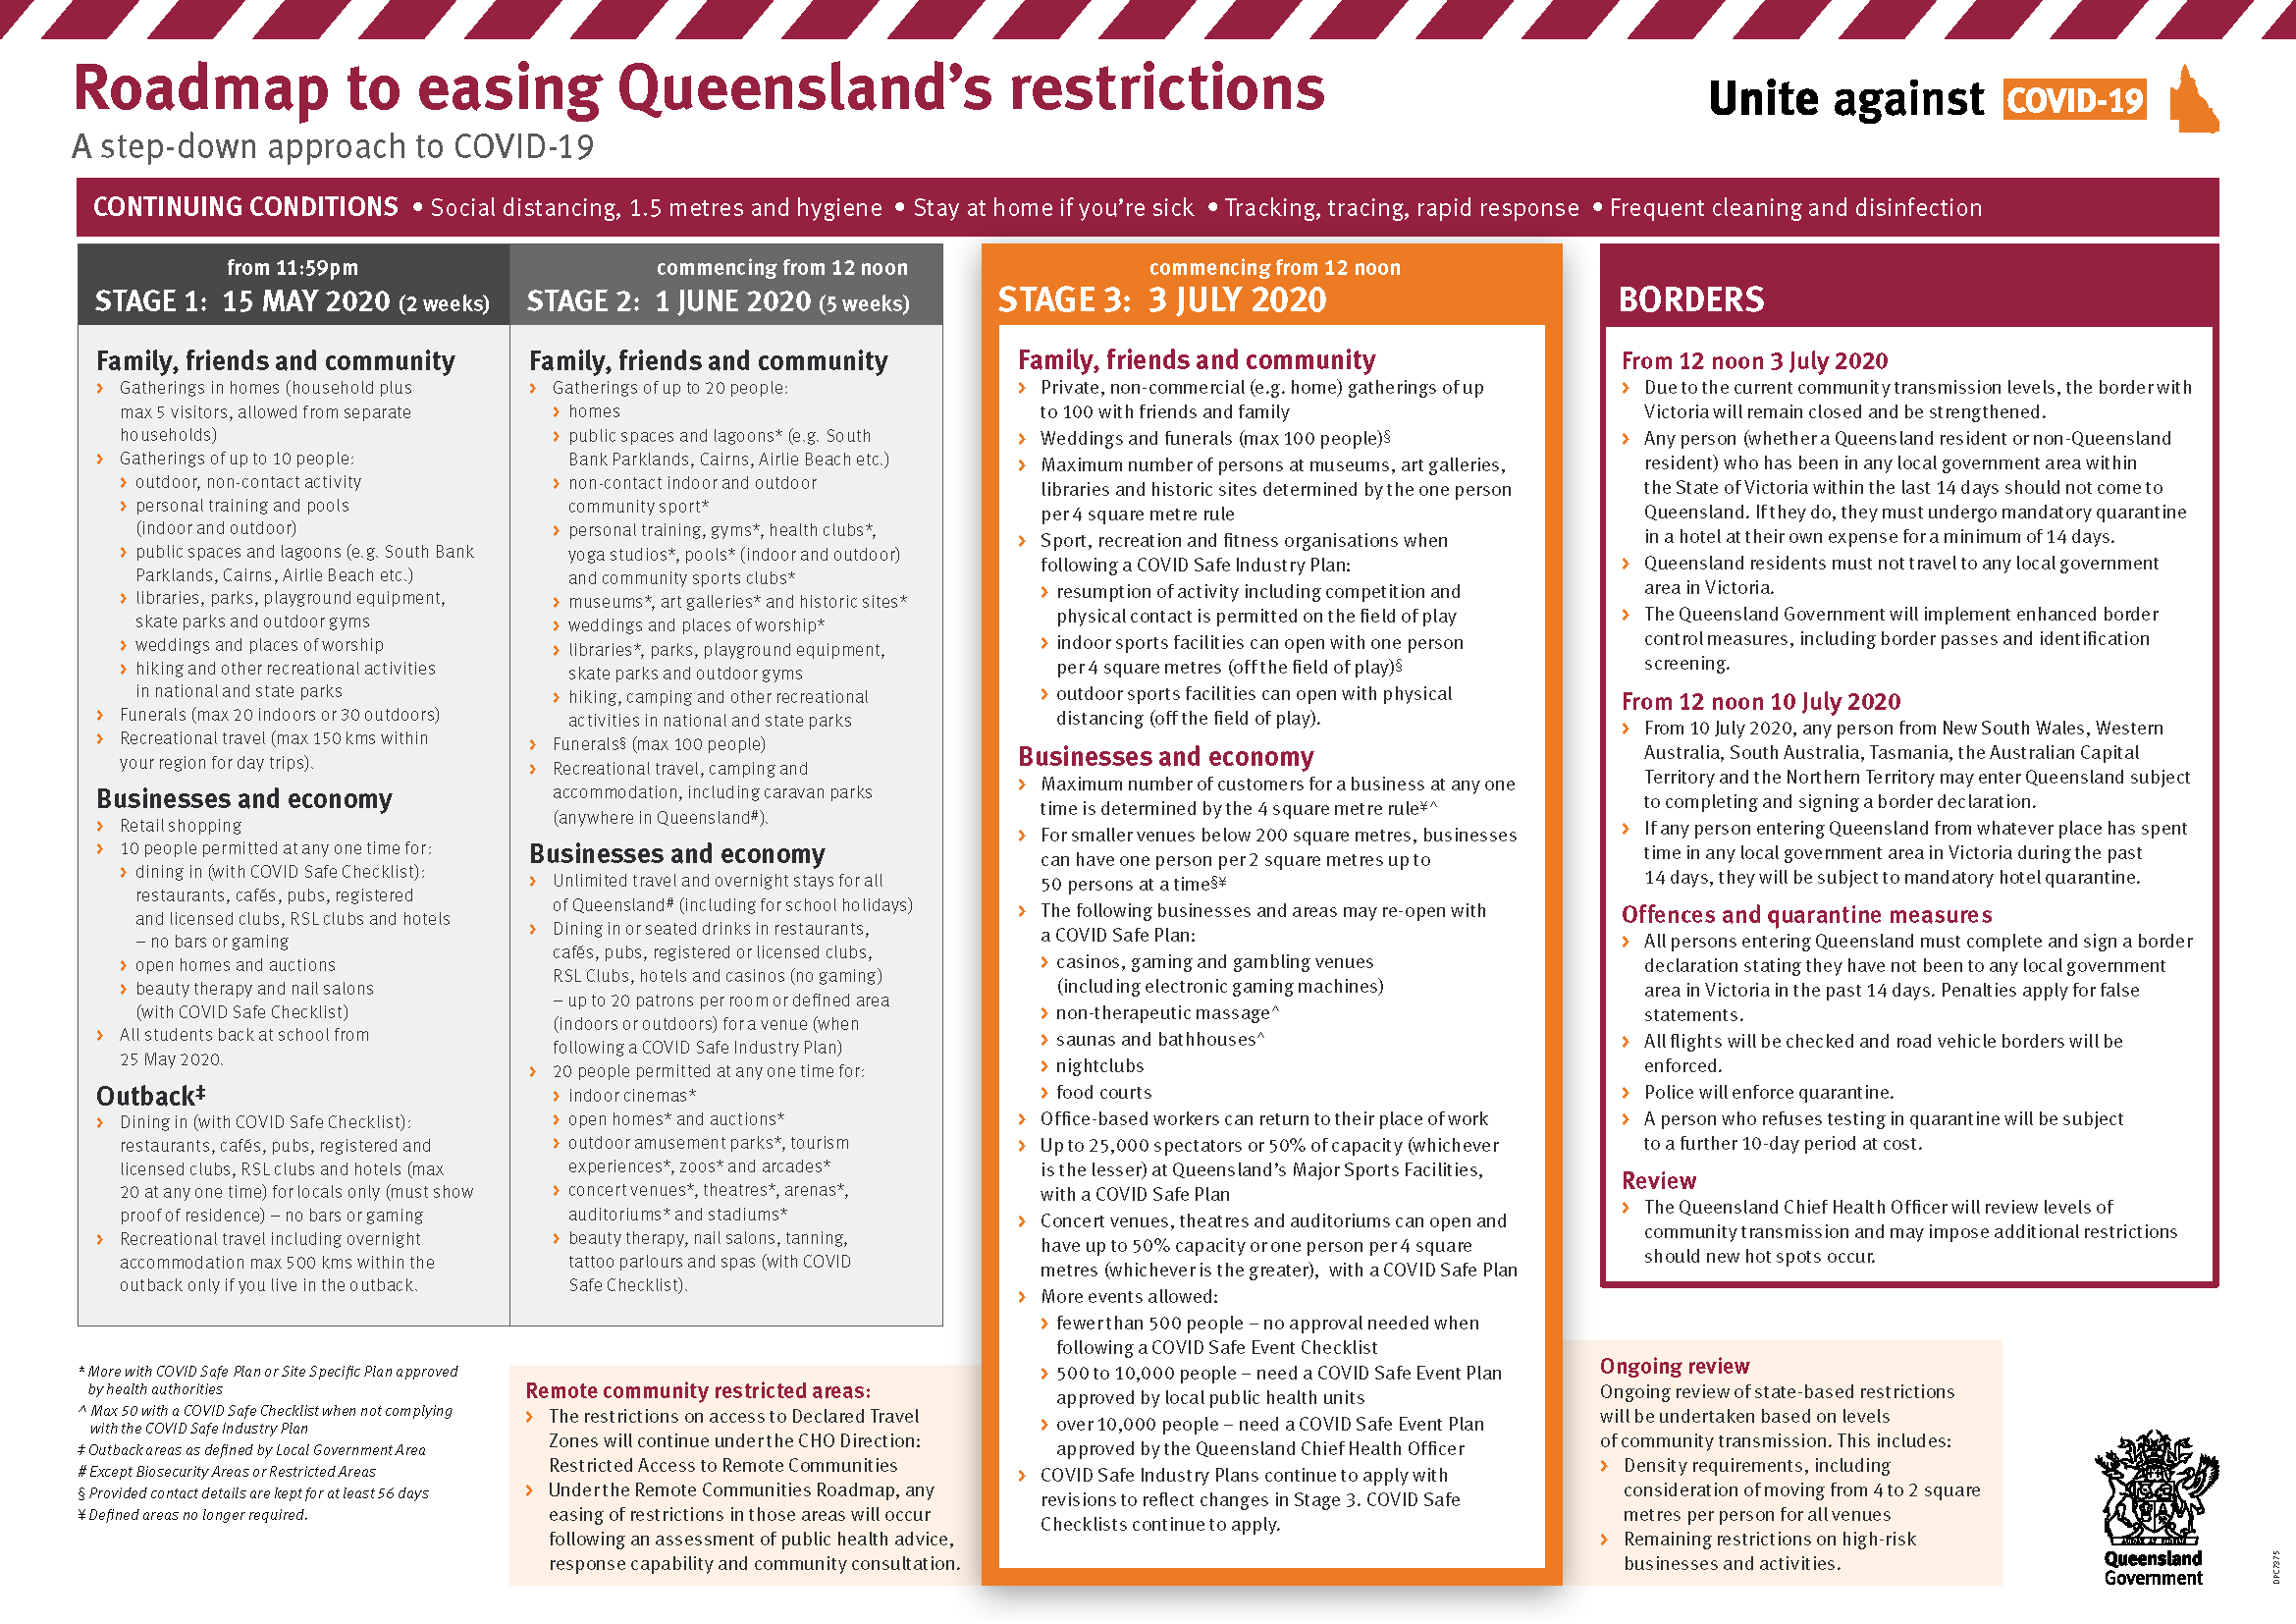 QLD Stage 3 Restrictions Roadmap